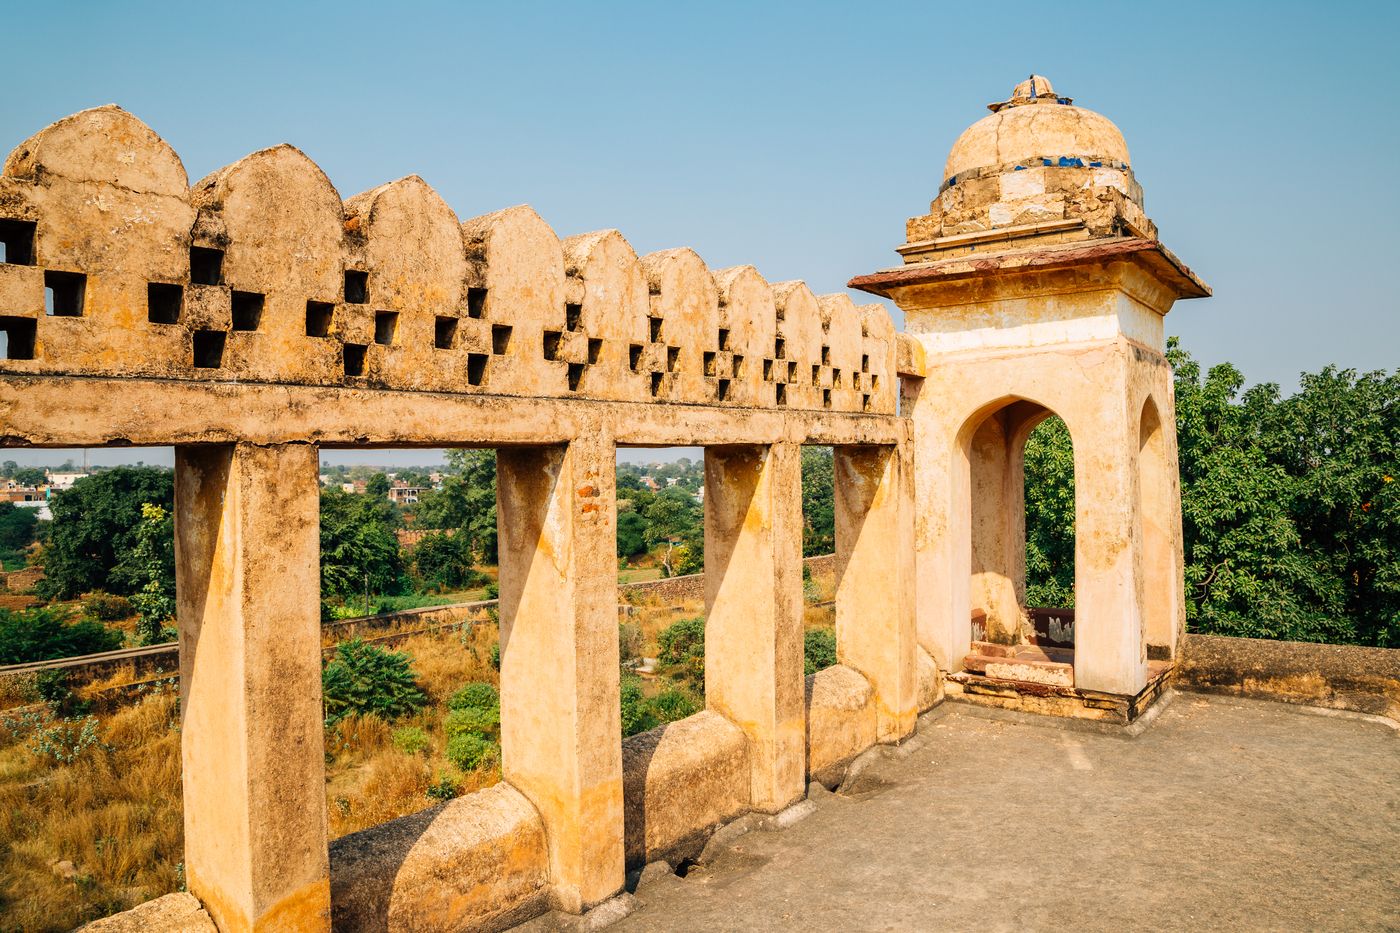 A side view of pillars on the balcony of Rai Parveen Mahal, a monument in Orchha built during the reign of King Indrajit and dedicated to poetess and musician Rai Parveen 